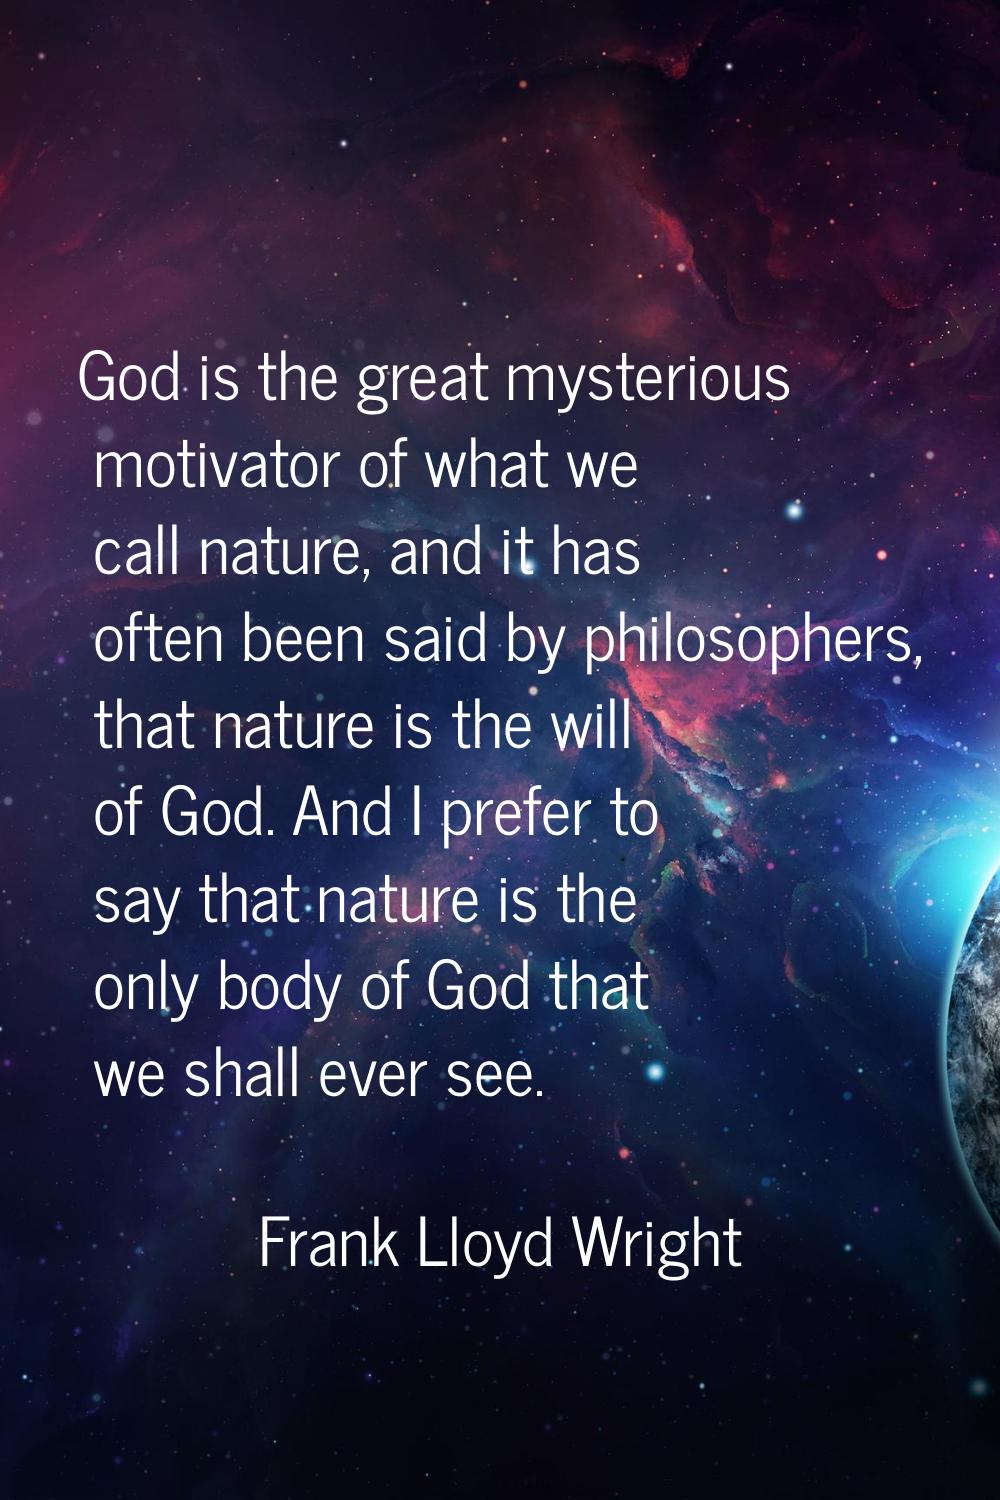 God is the great mysterious motivator of what we call nature, and it has often been said by philoso